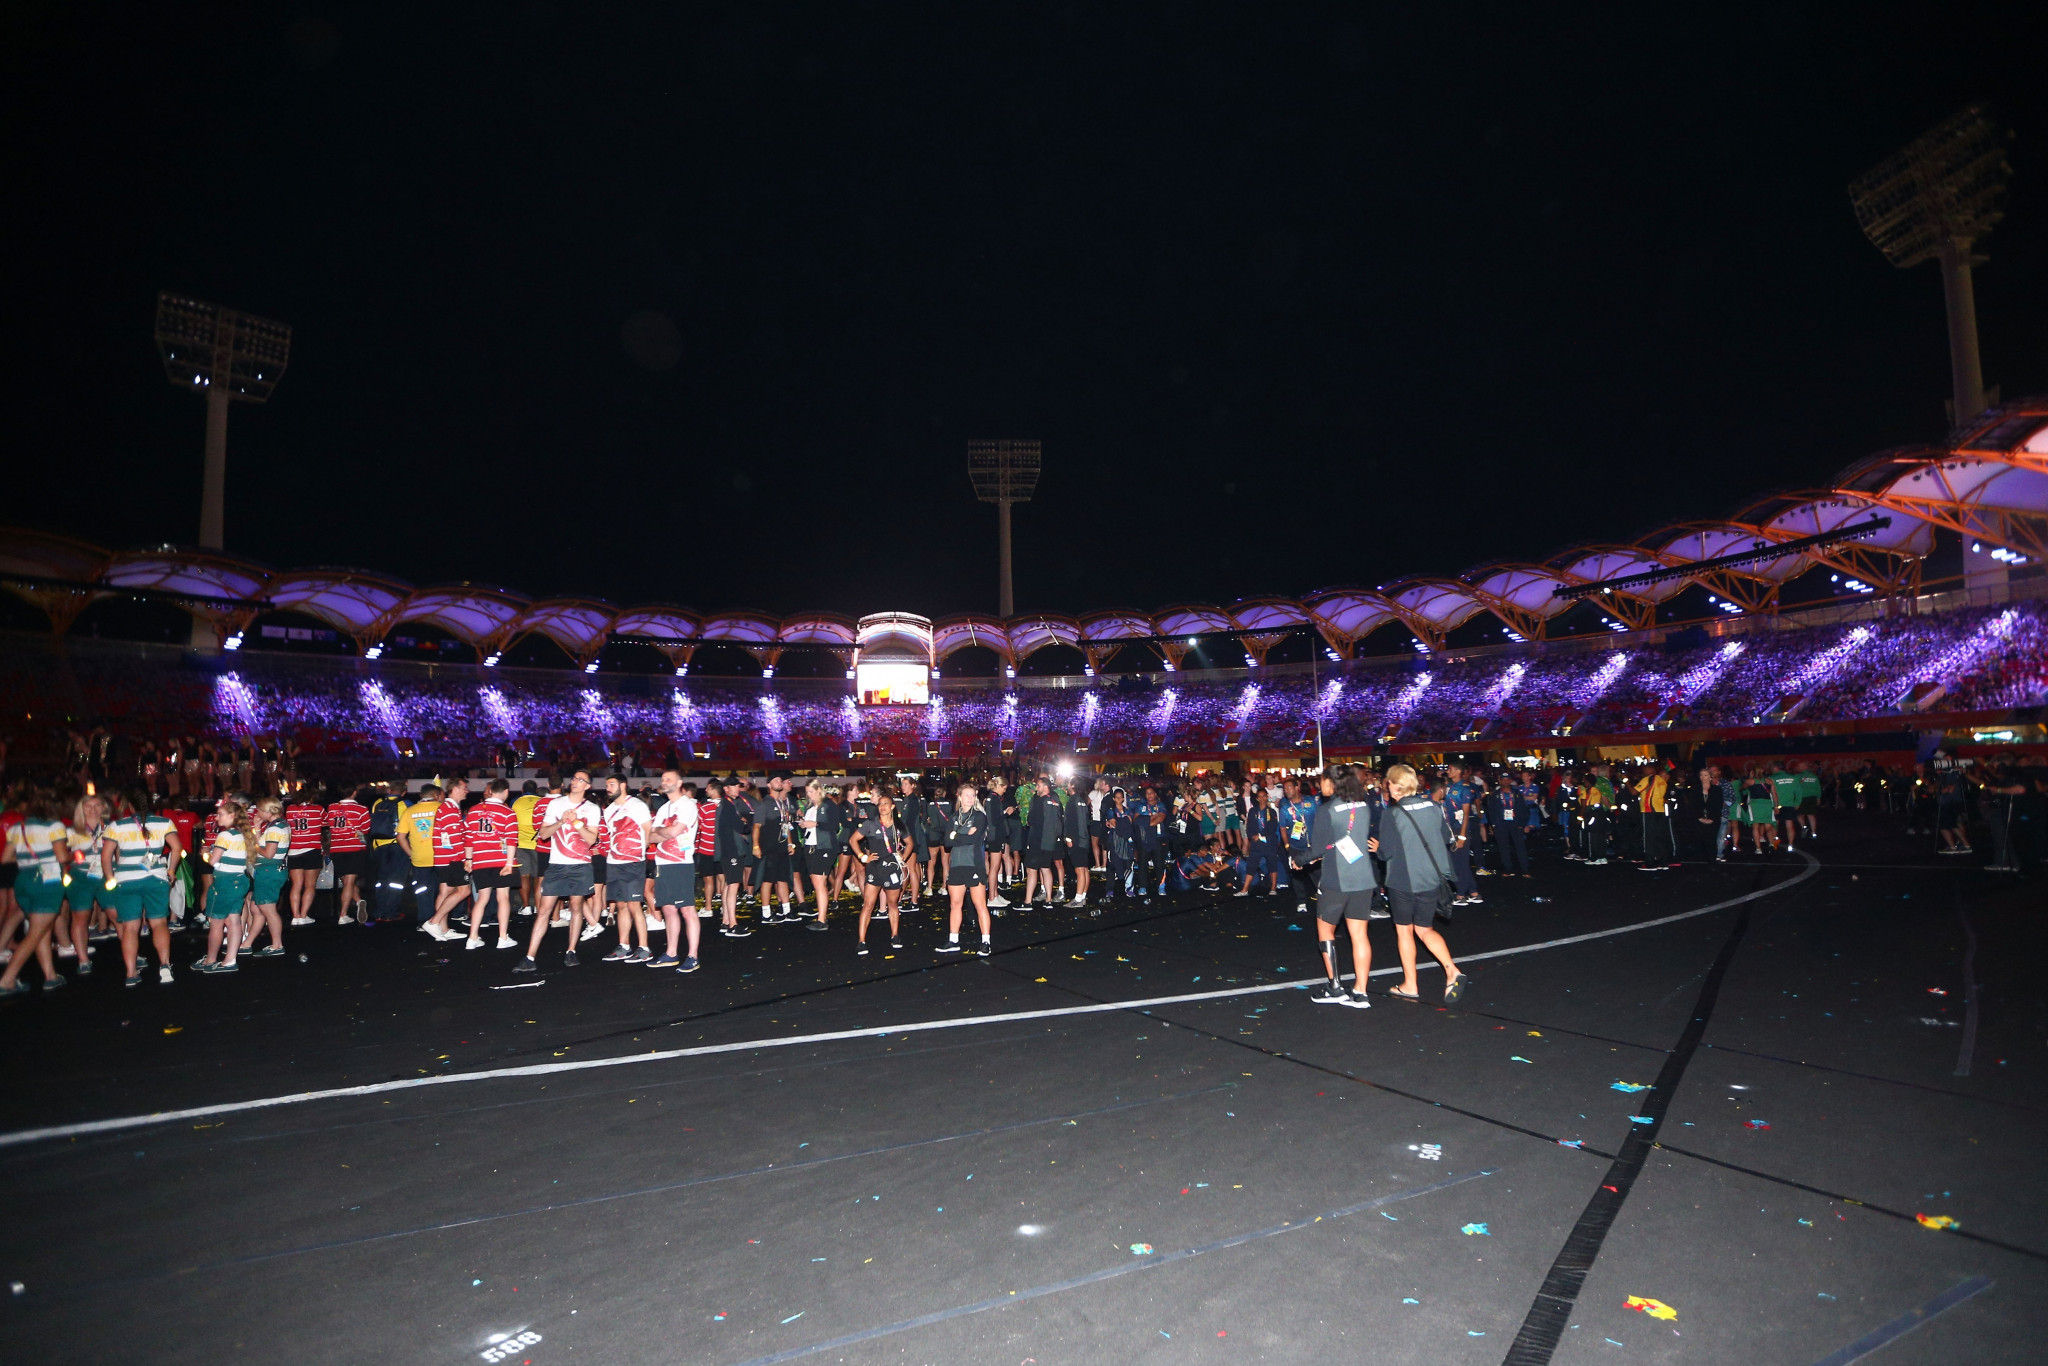 Athletes who competed at the Commonwealth Games here walked into the stadium in the pre-show of the Ceremony and before the spectacle was broadcast live ©Getty Images